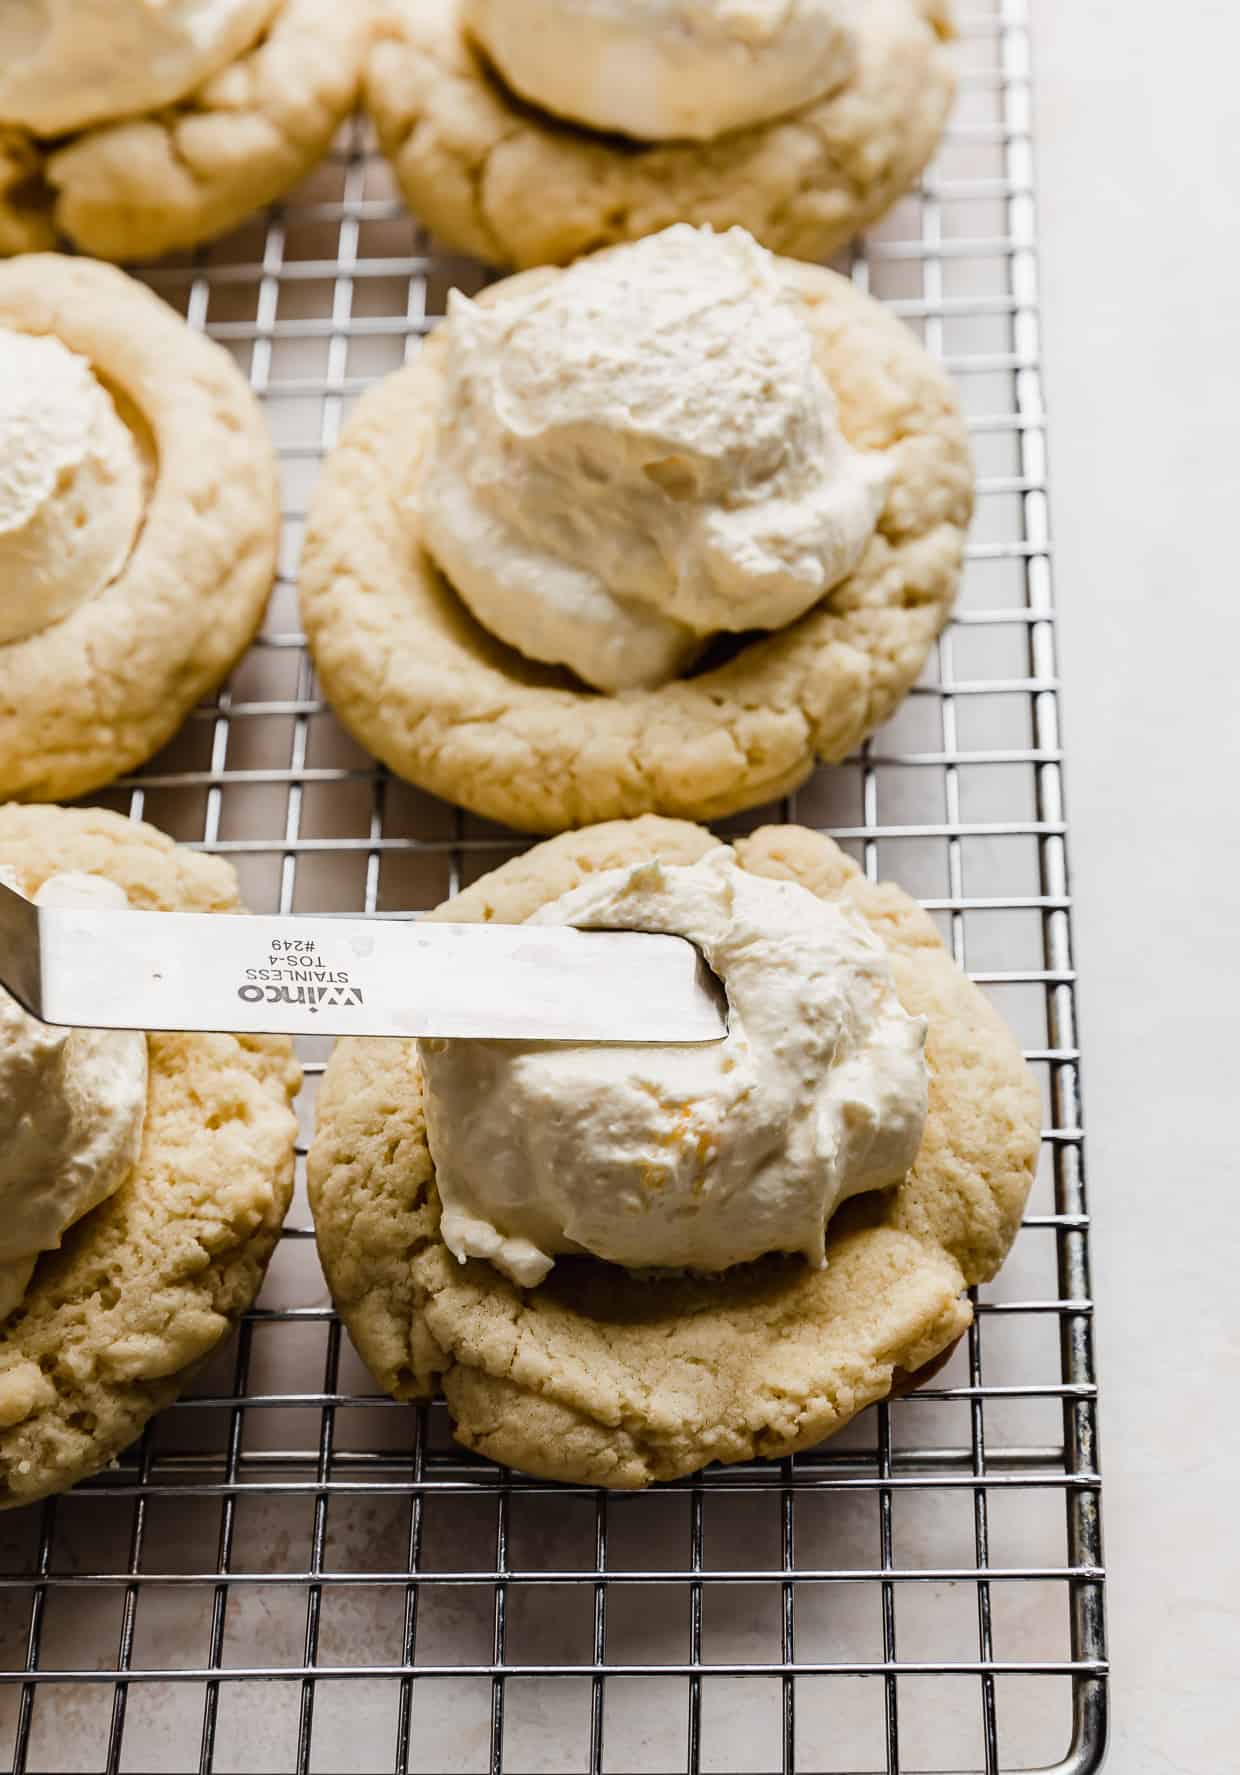 An offset spatula spreading cheaters pastry cream on a cookie.